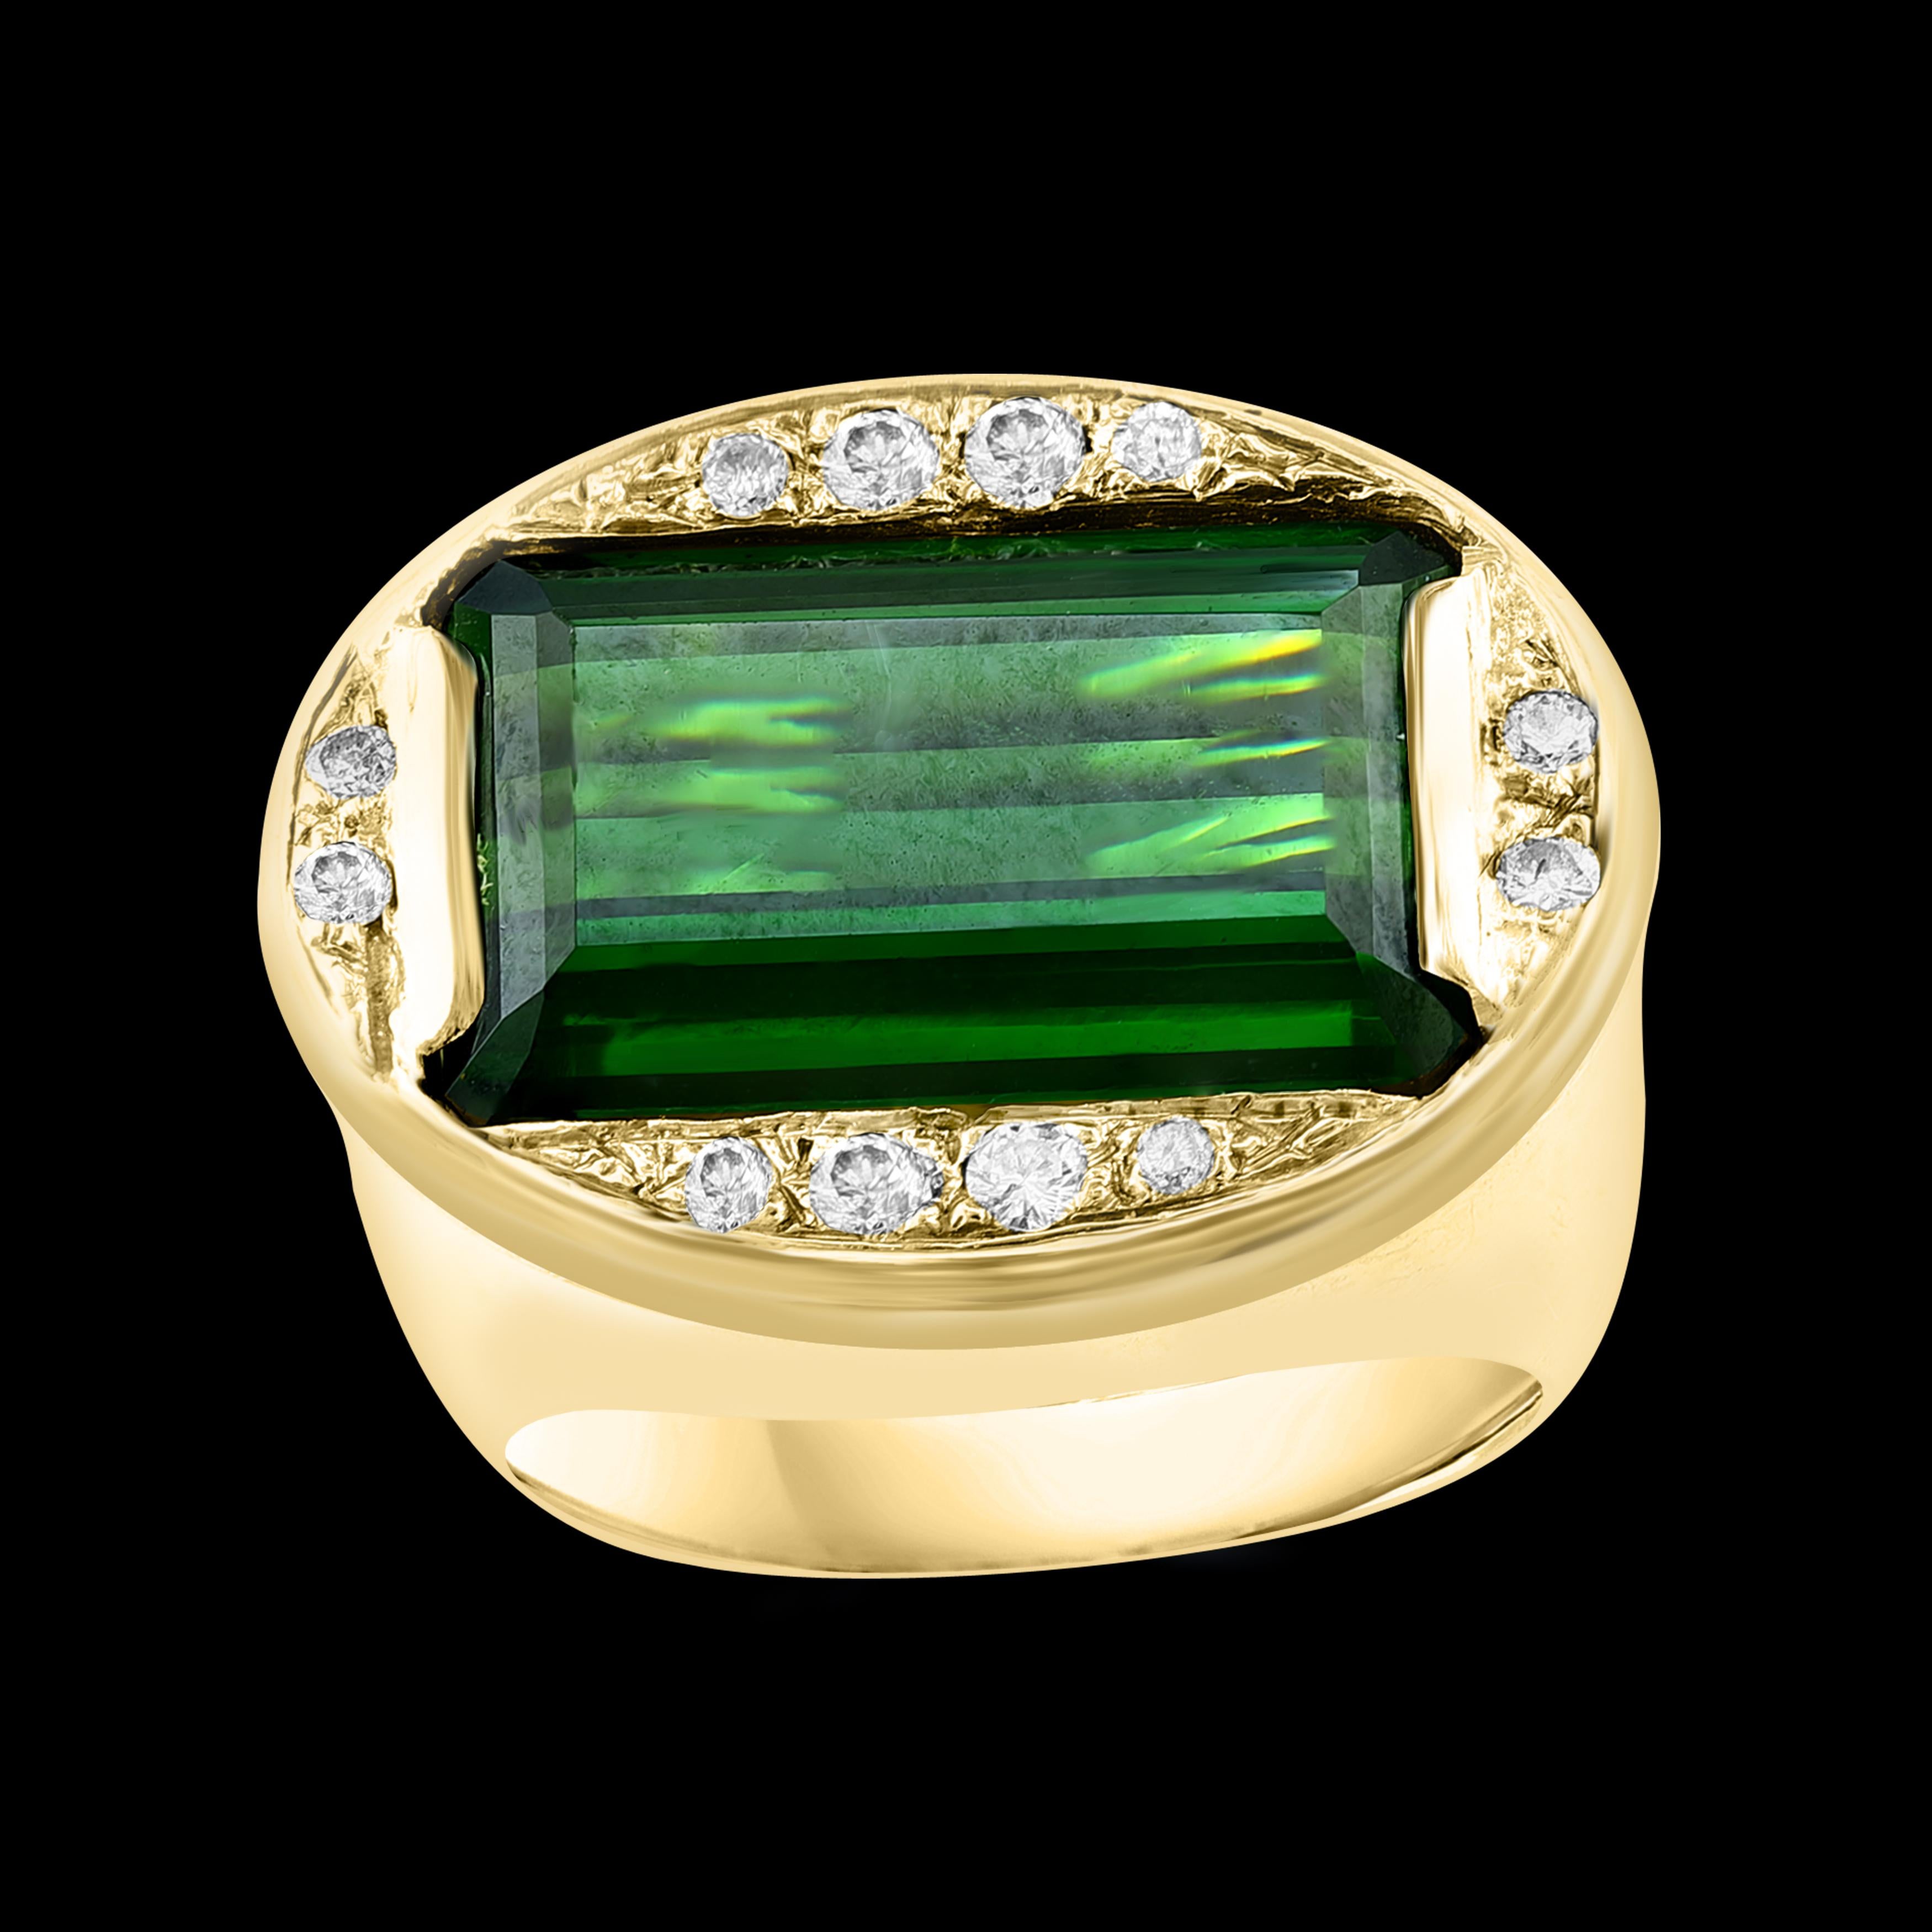 GIA Certified 11.72 Ct Green Tourmaline & Diamond Cocktail Ring 14K Yellow Gold For Sale 9